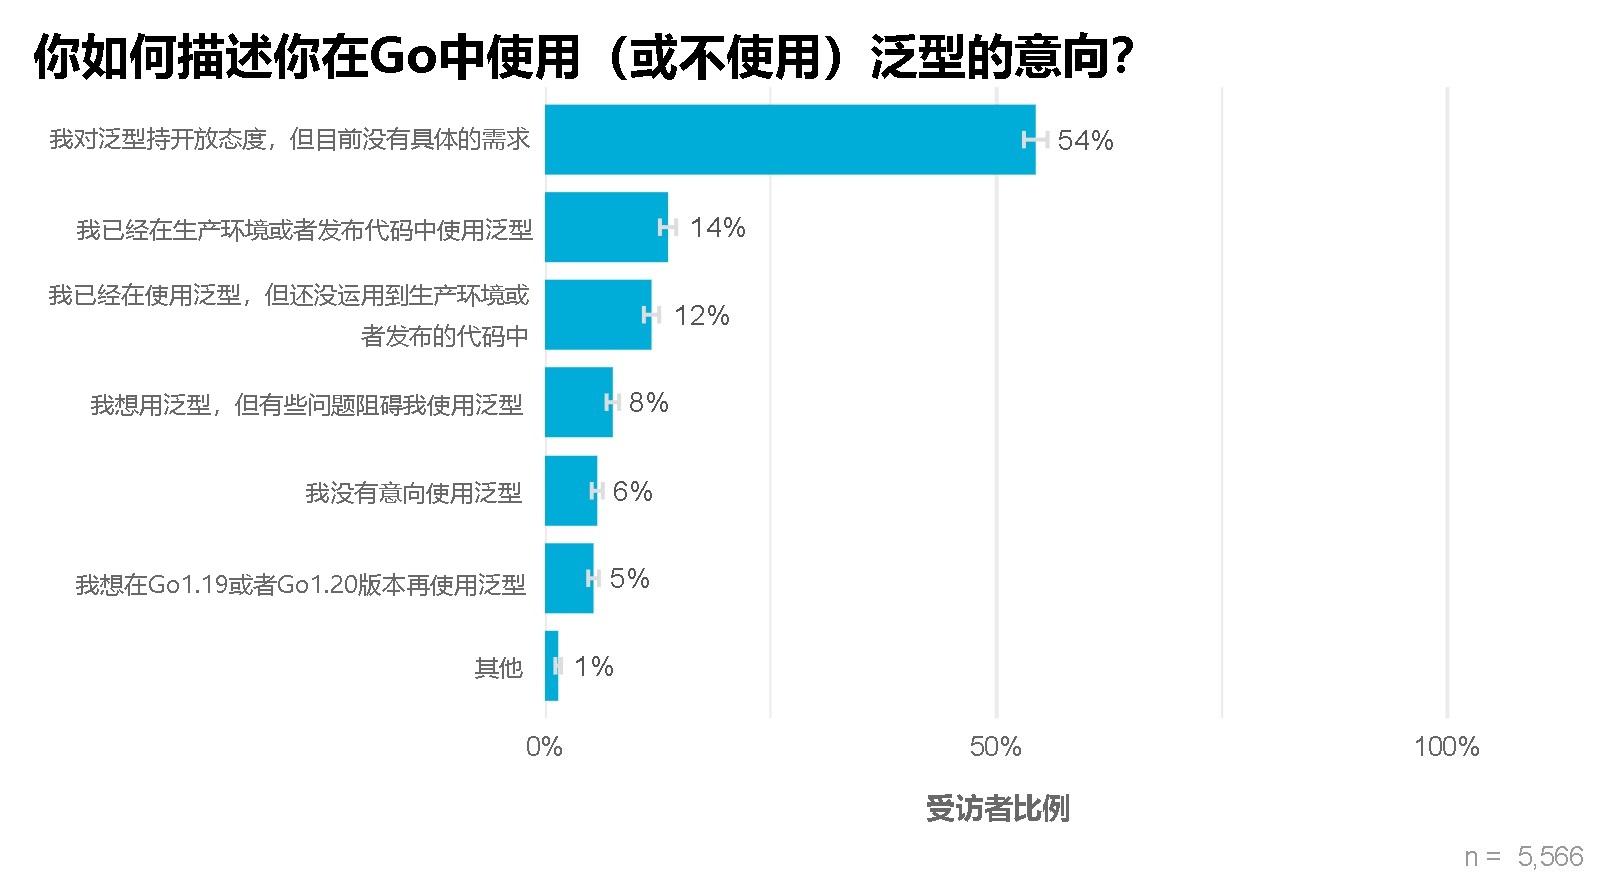 Chart showing 26% of respondents are already using Go generics